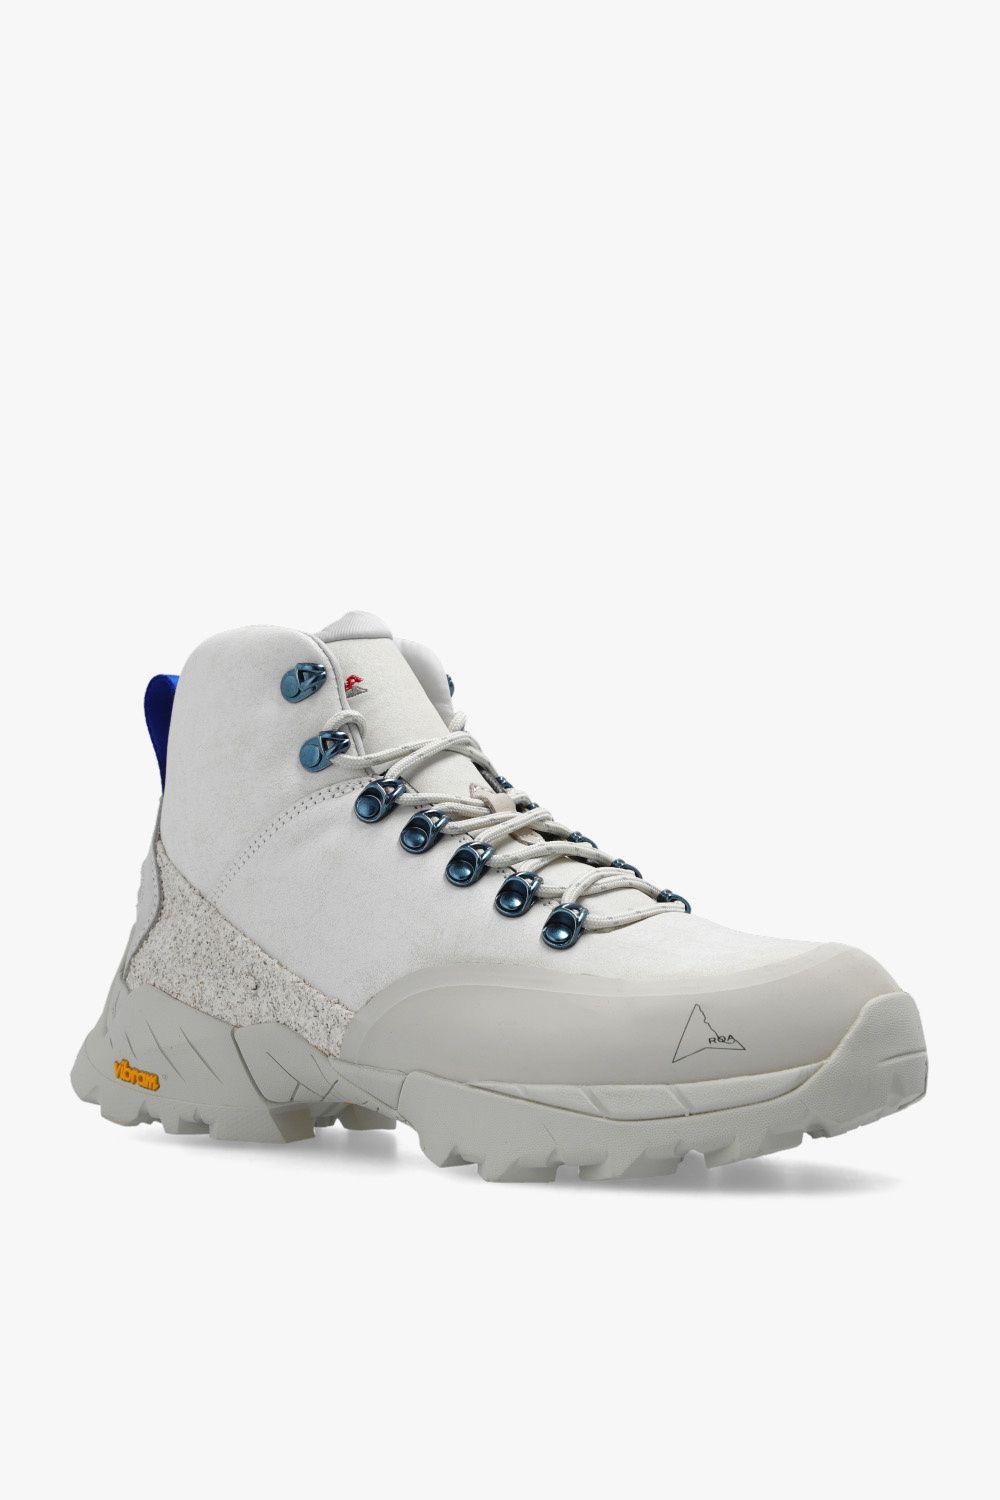 Roa 'andreas' Hiking Boots in White | Lyst